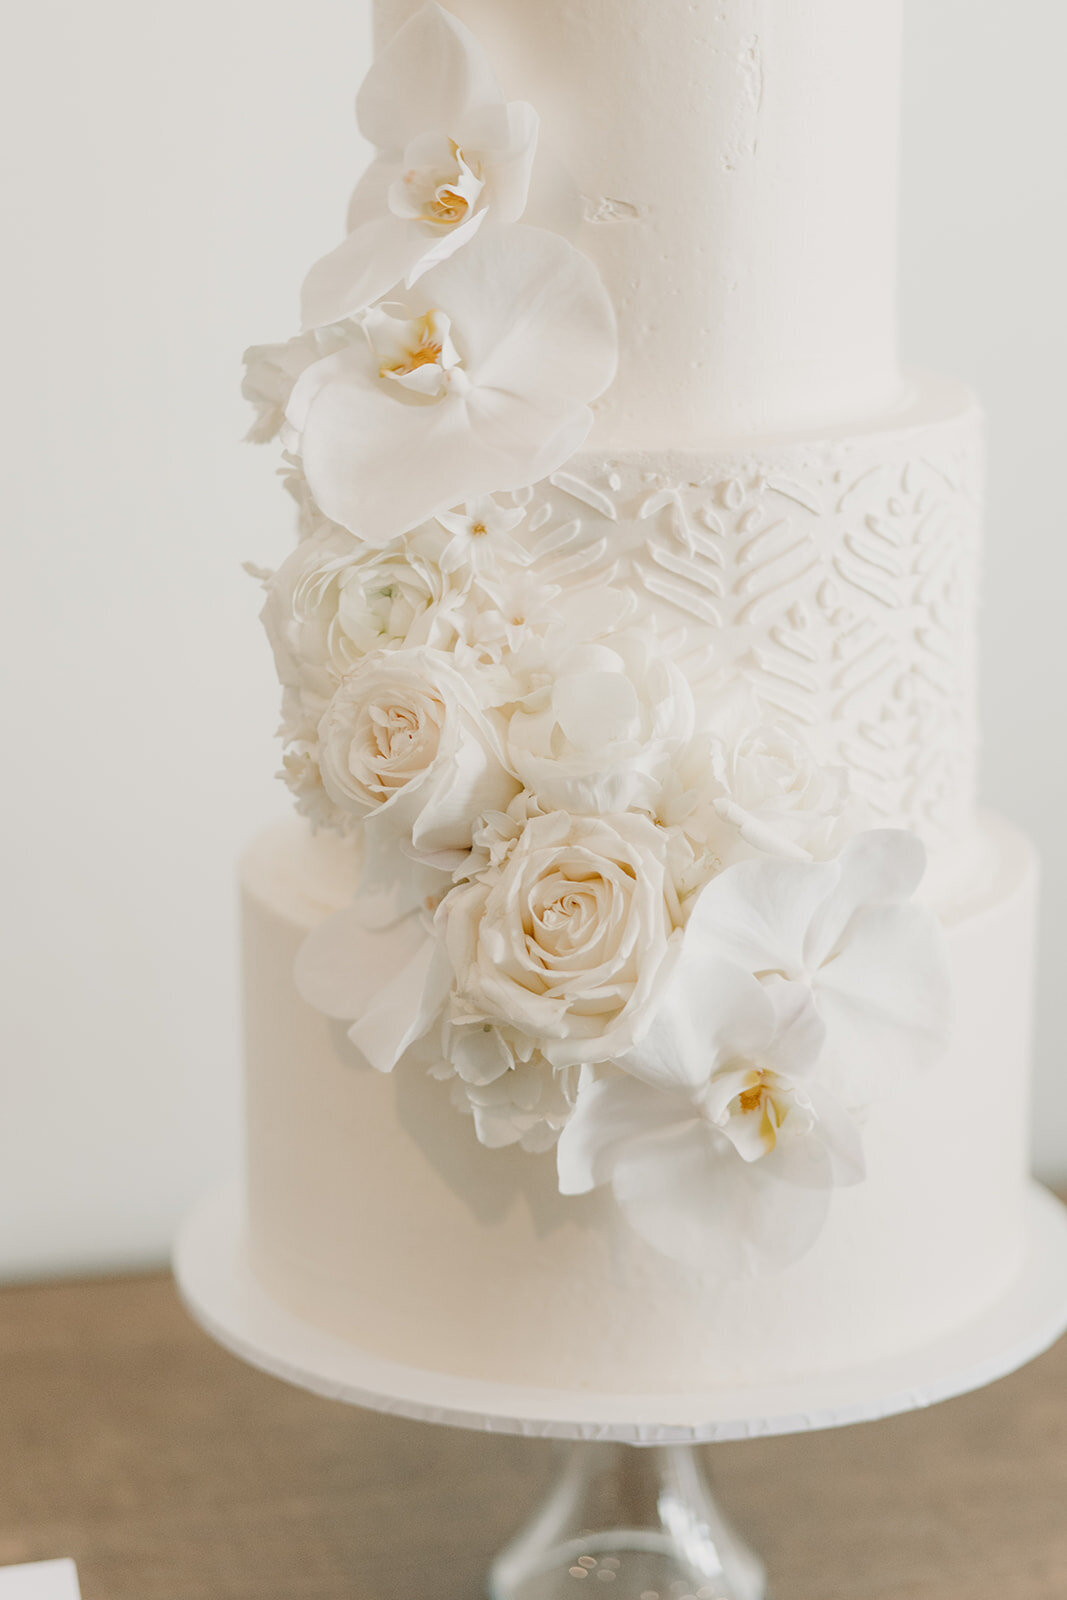 White wedding cake with white flowers and detail